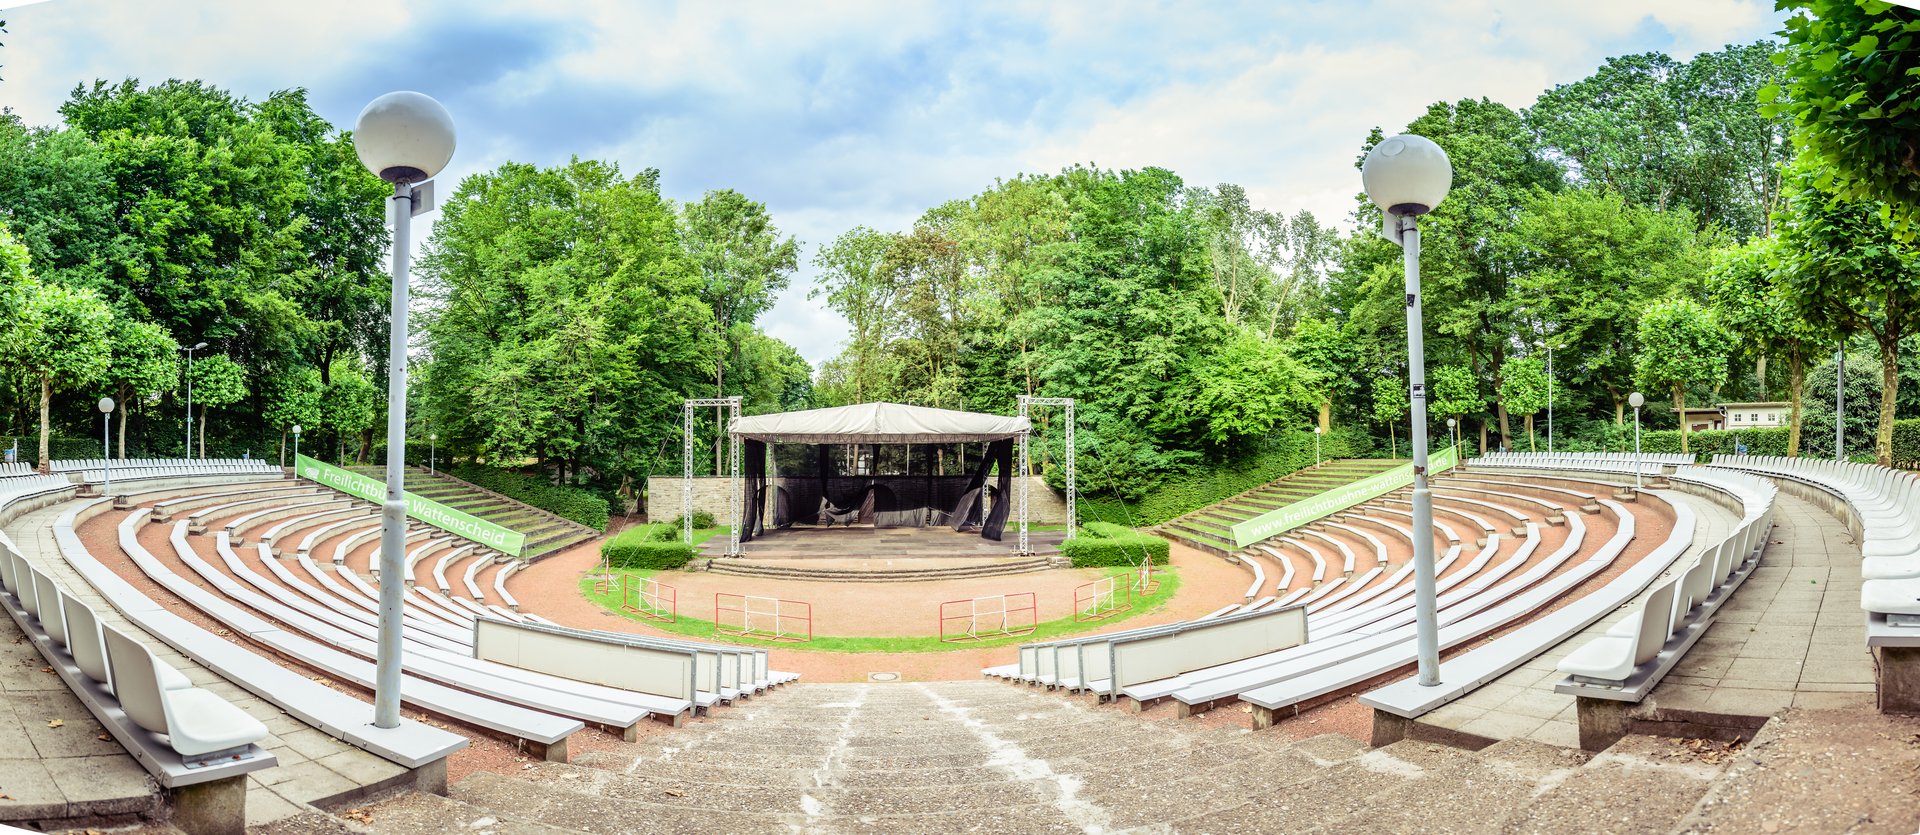 Panorama shot of the empty Freilichtbühne Wattenscheid. In the foreground two lanterns, the rows of seats and the flight of steps leading to the stage. In the background green trees.